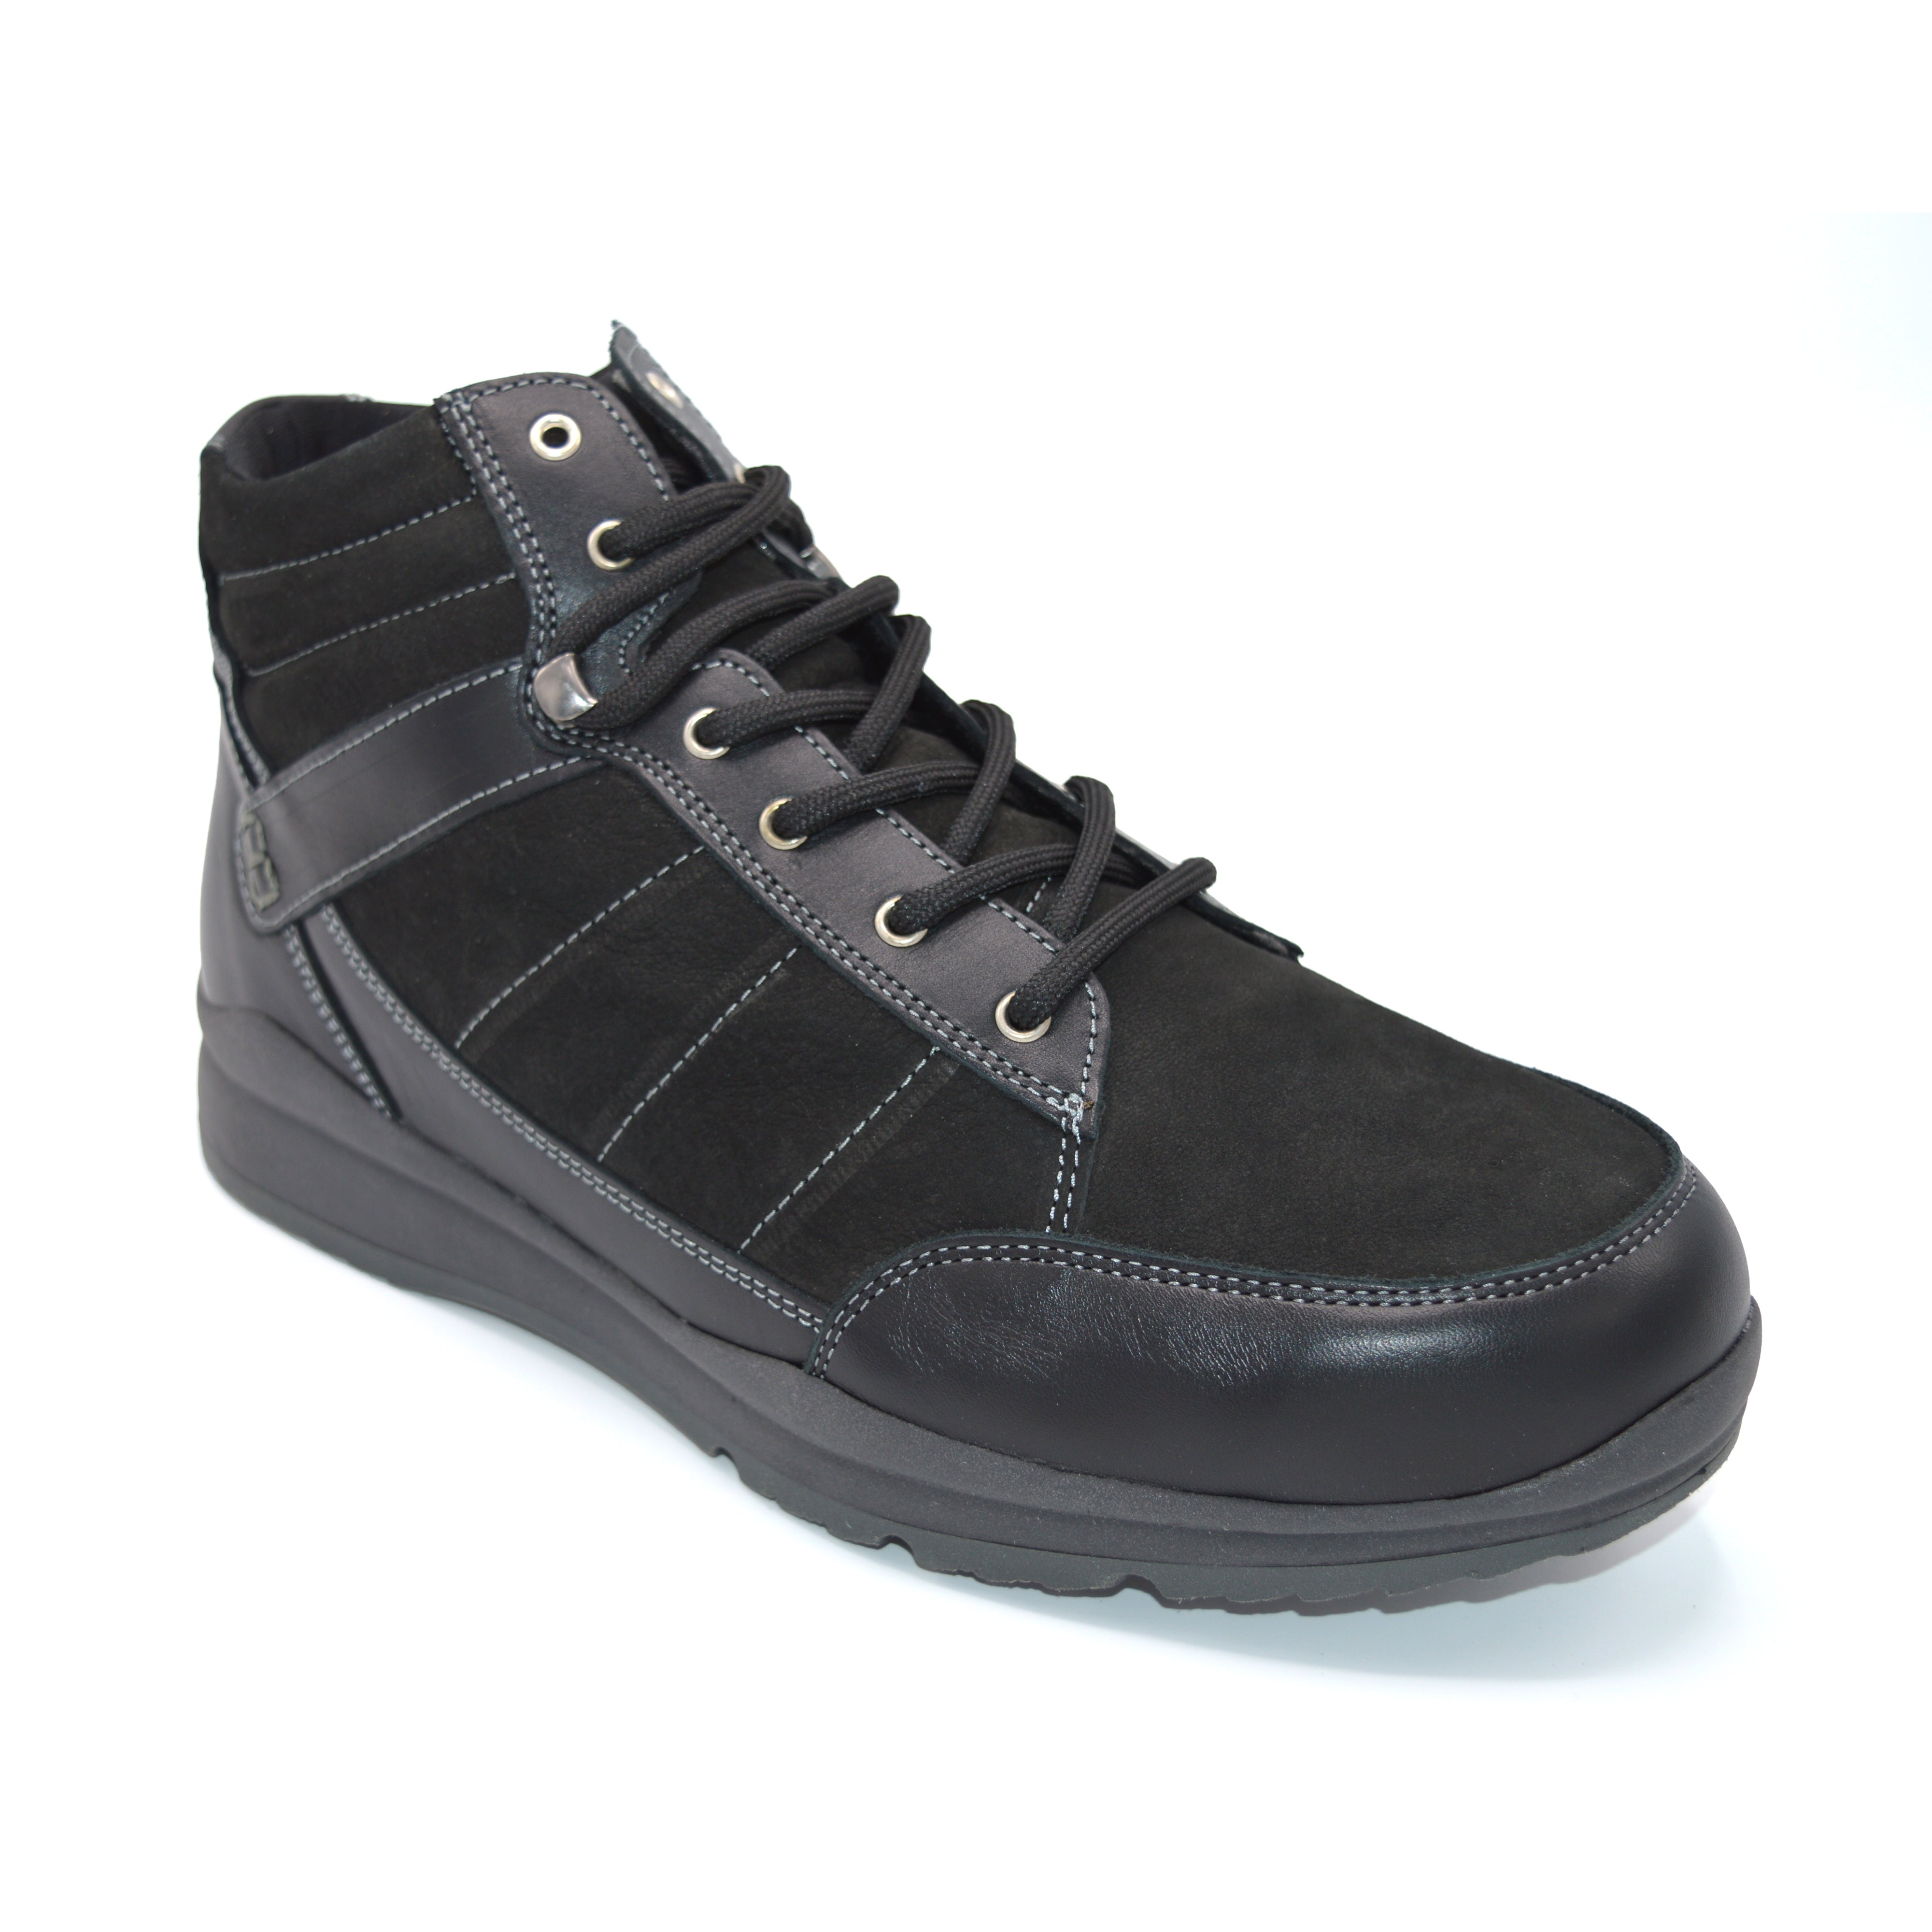 Air-Cushioned Lace-up Boot For Plantar Fasciitis